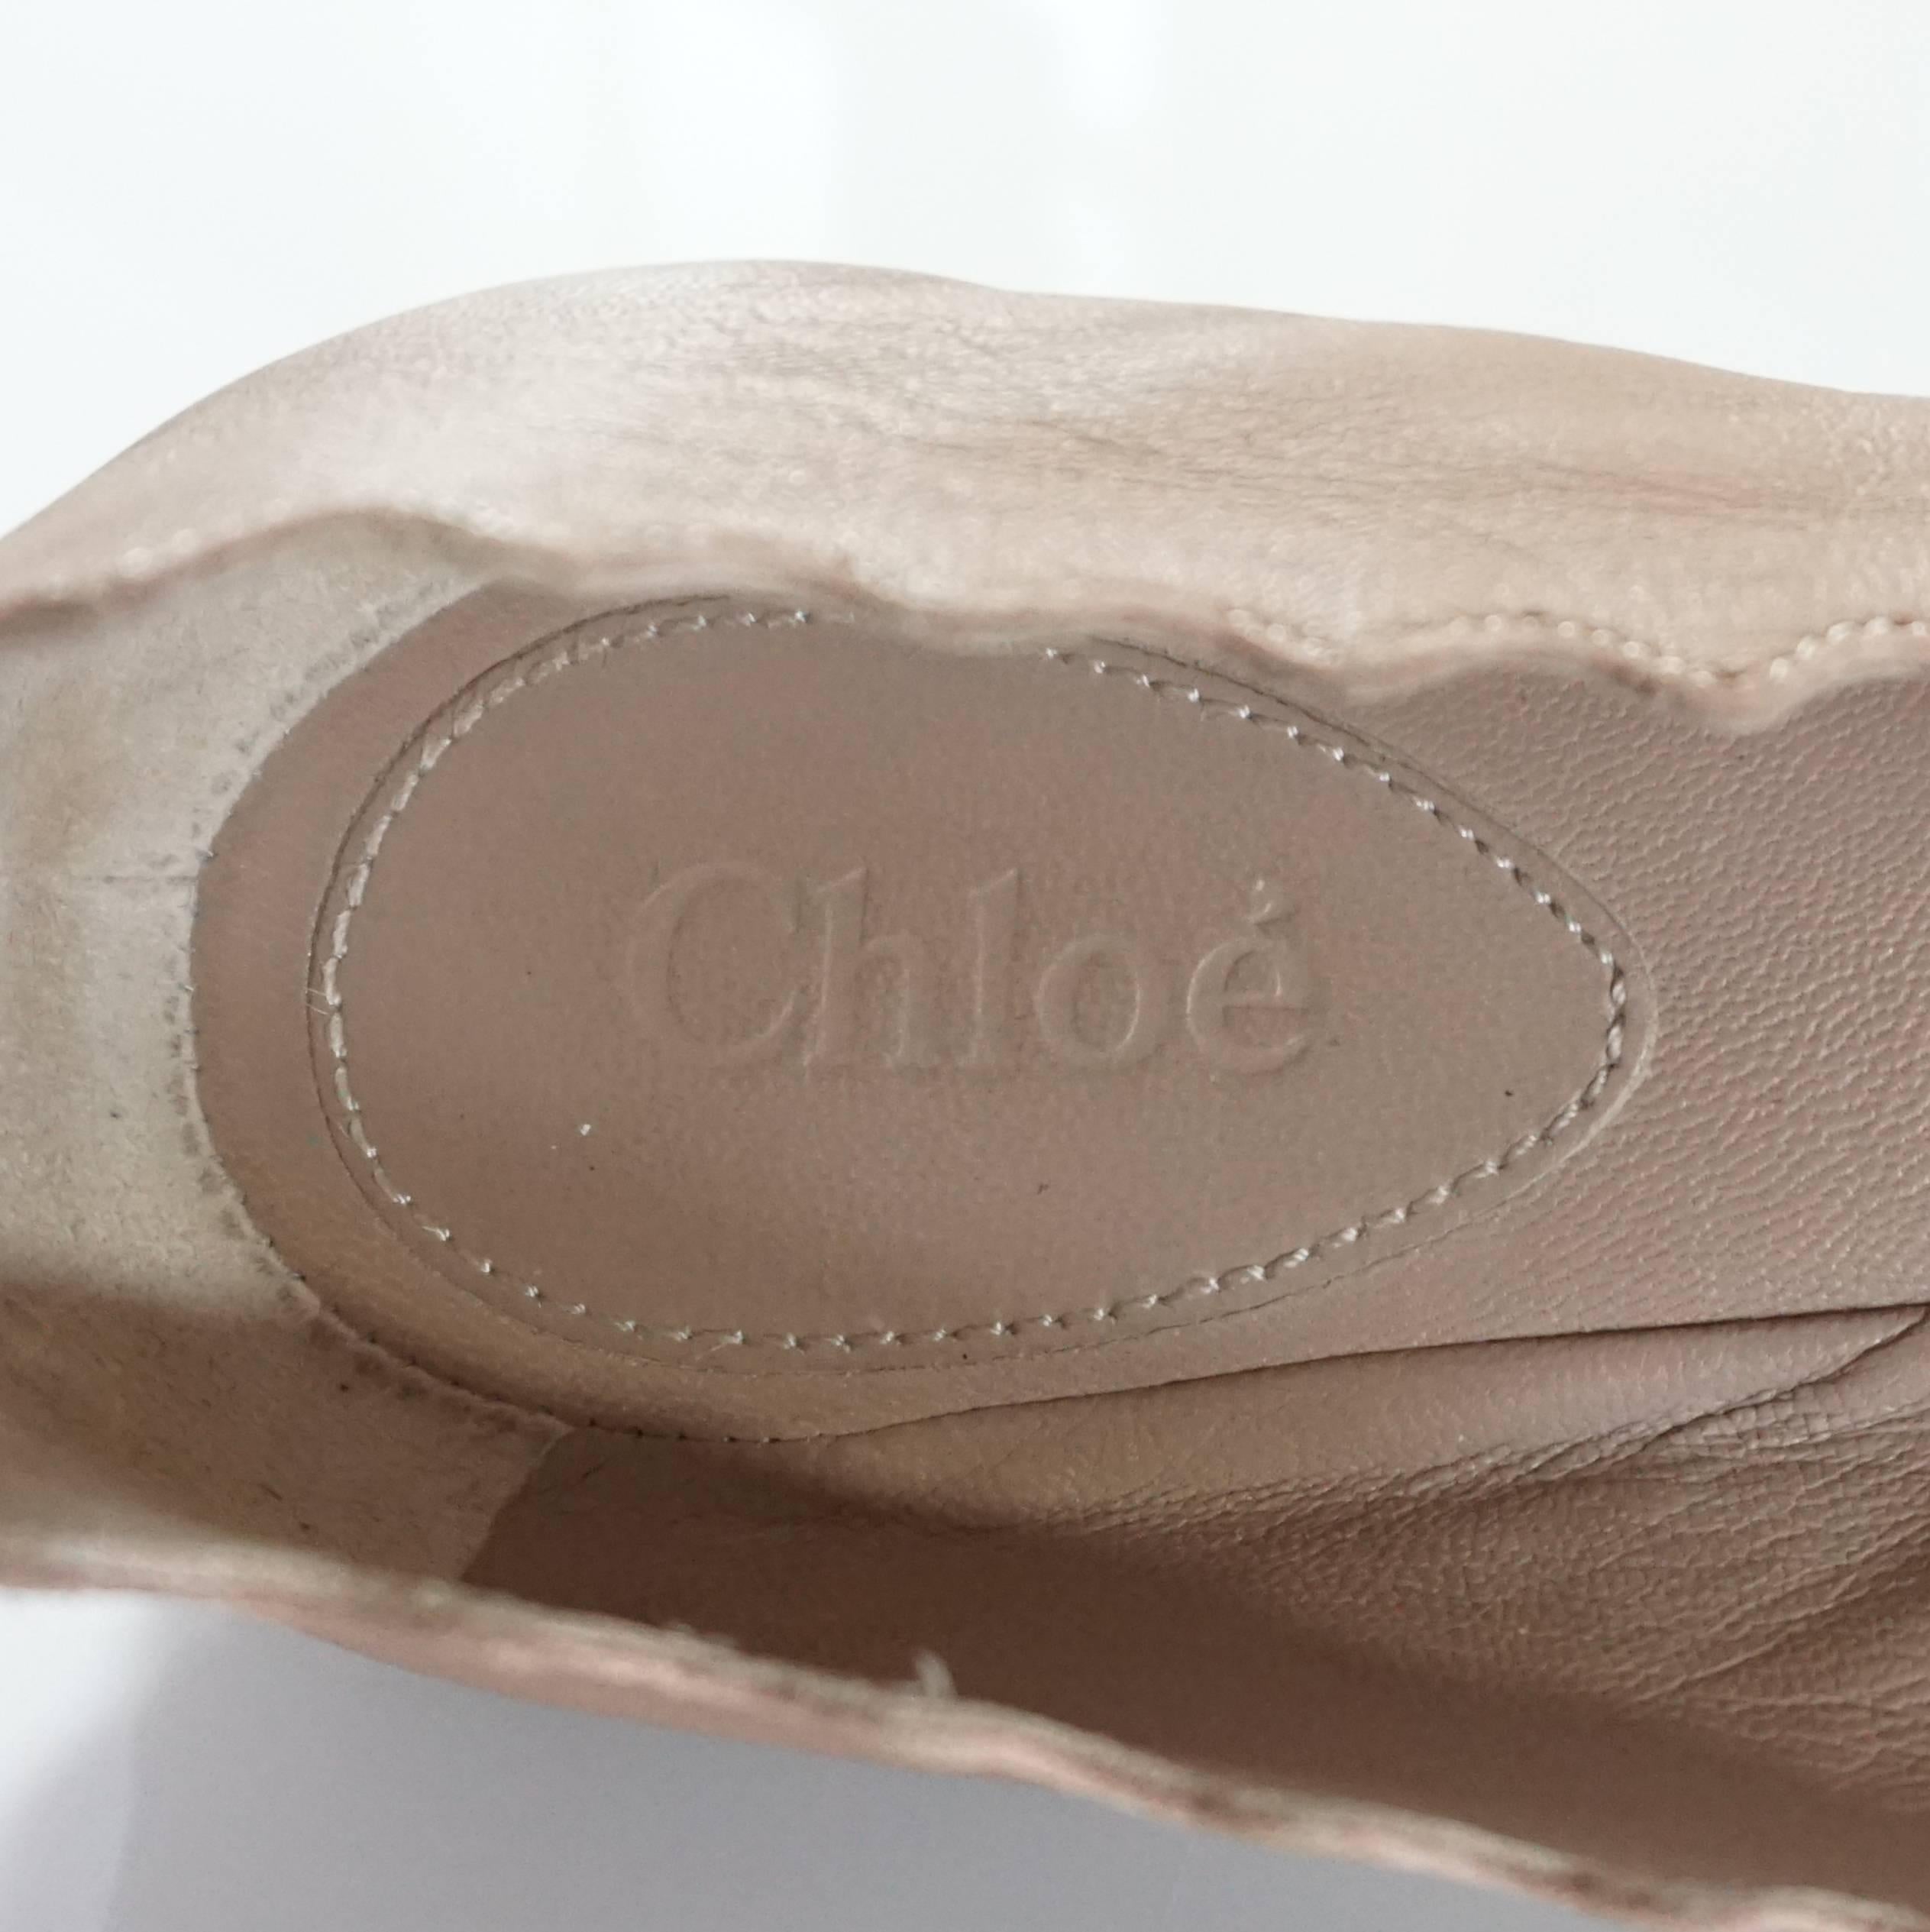 Chloe Dusty Rose Leather Scalloped Flats – 39 1